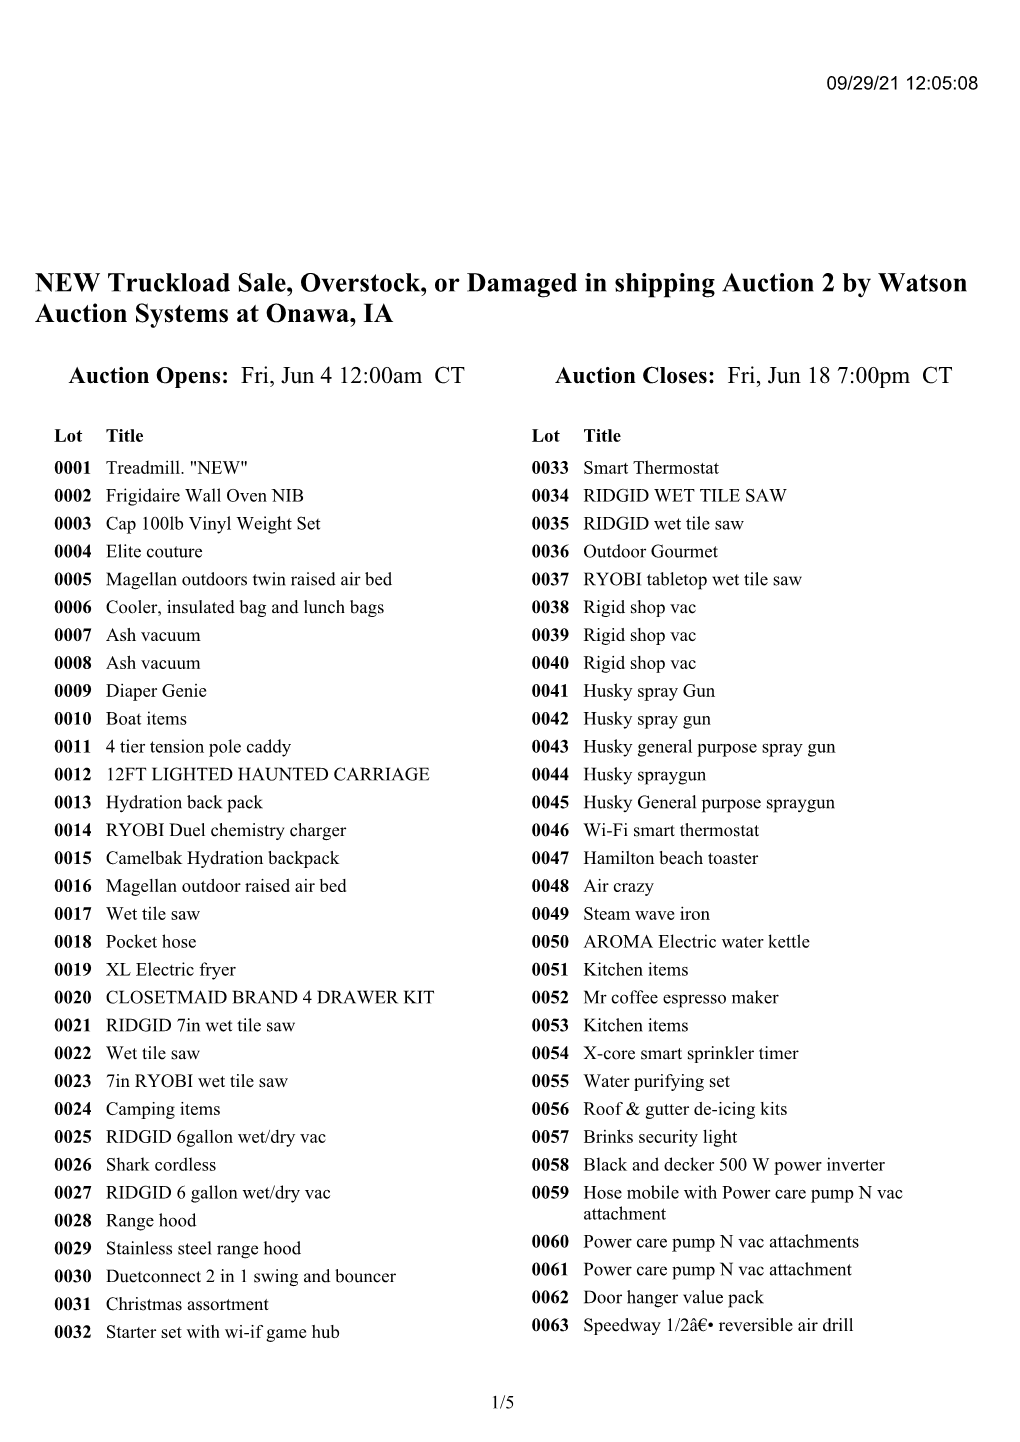 NEW Truckload Sale, Overstock, Or Damaged in Shipping Auction 2 by Watson Auction Systems at Onawa, IA